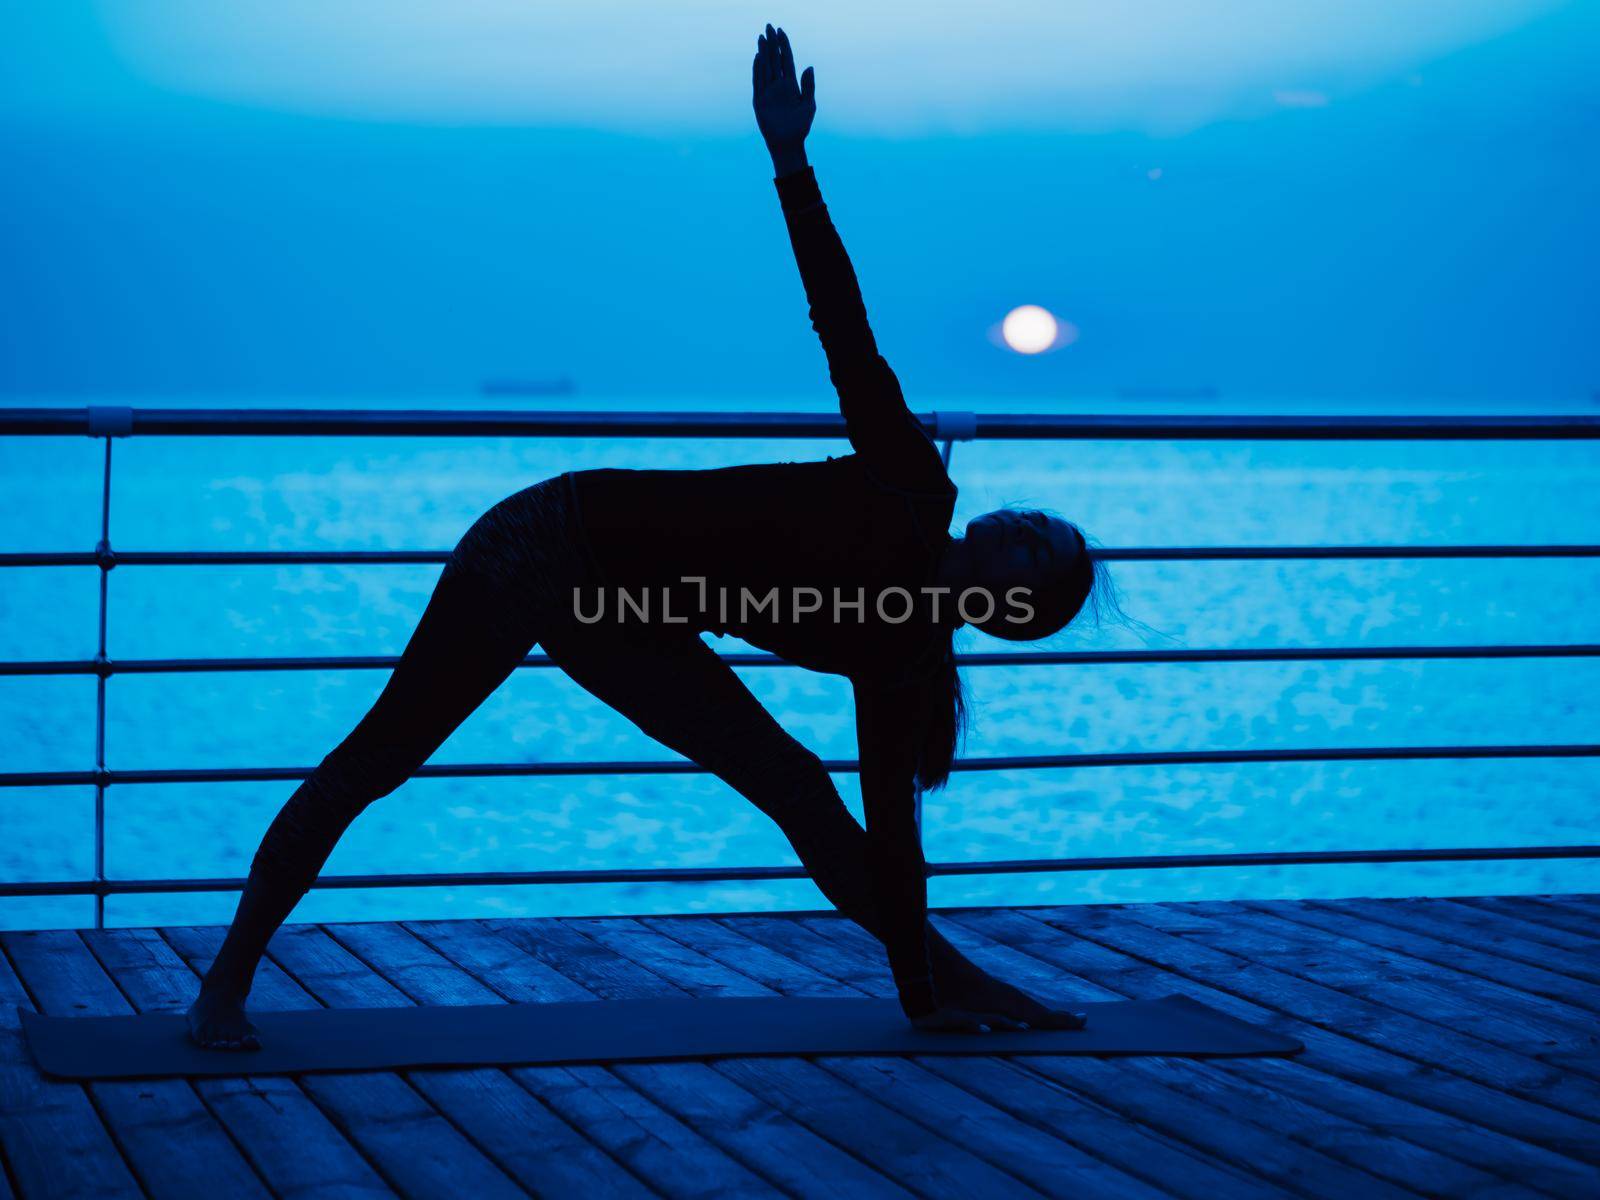 Yoga under full moon over night ocean or sea beach. Young woman's meditation during practice